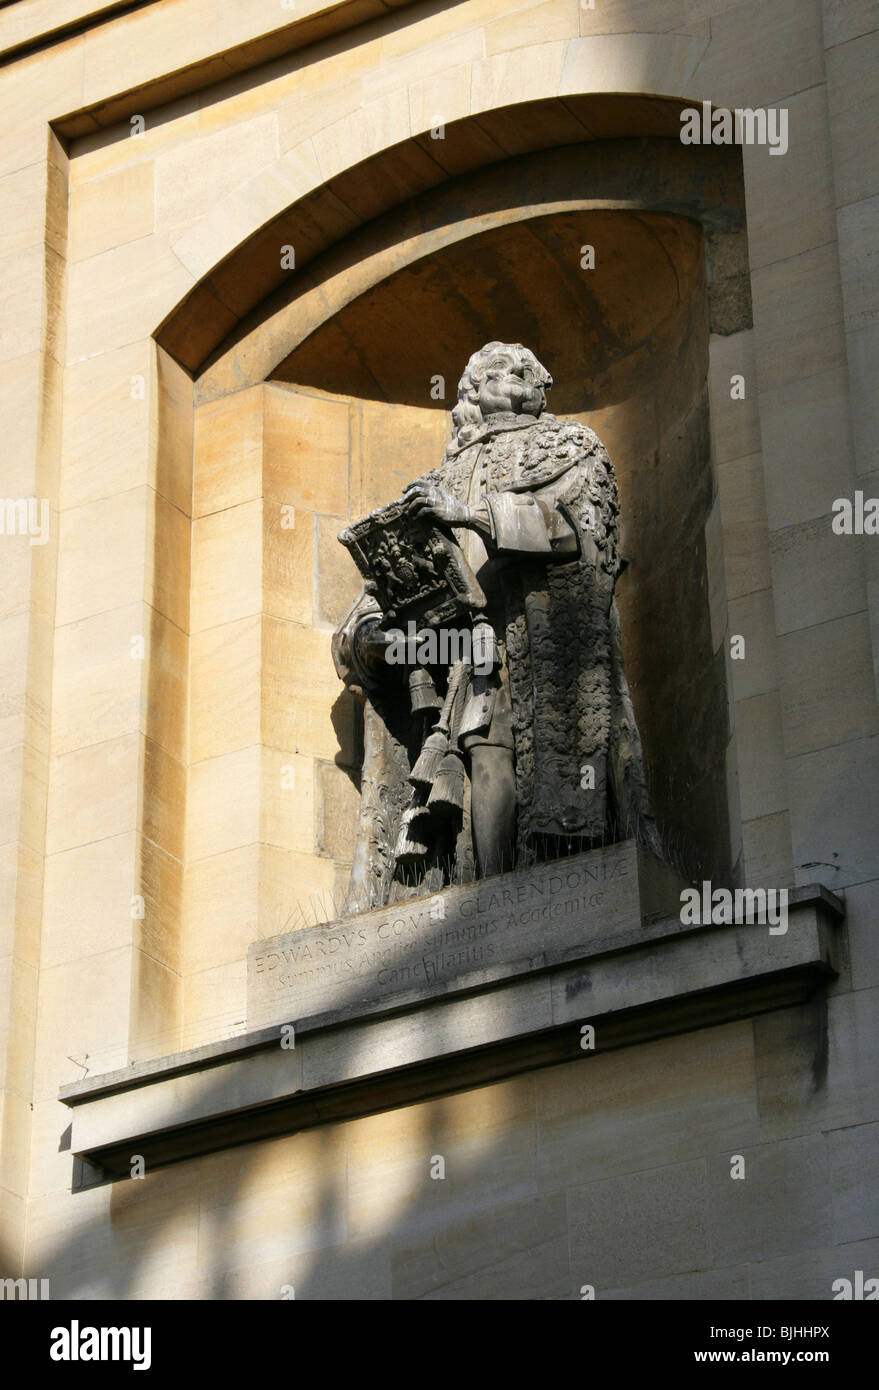 Edwardus Comes Clarendonus, Statue in an Alcove at the Sheldonian Theatre, Oxford University, Oxford, Oxfordshire, UK Stock Photo